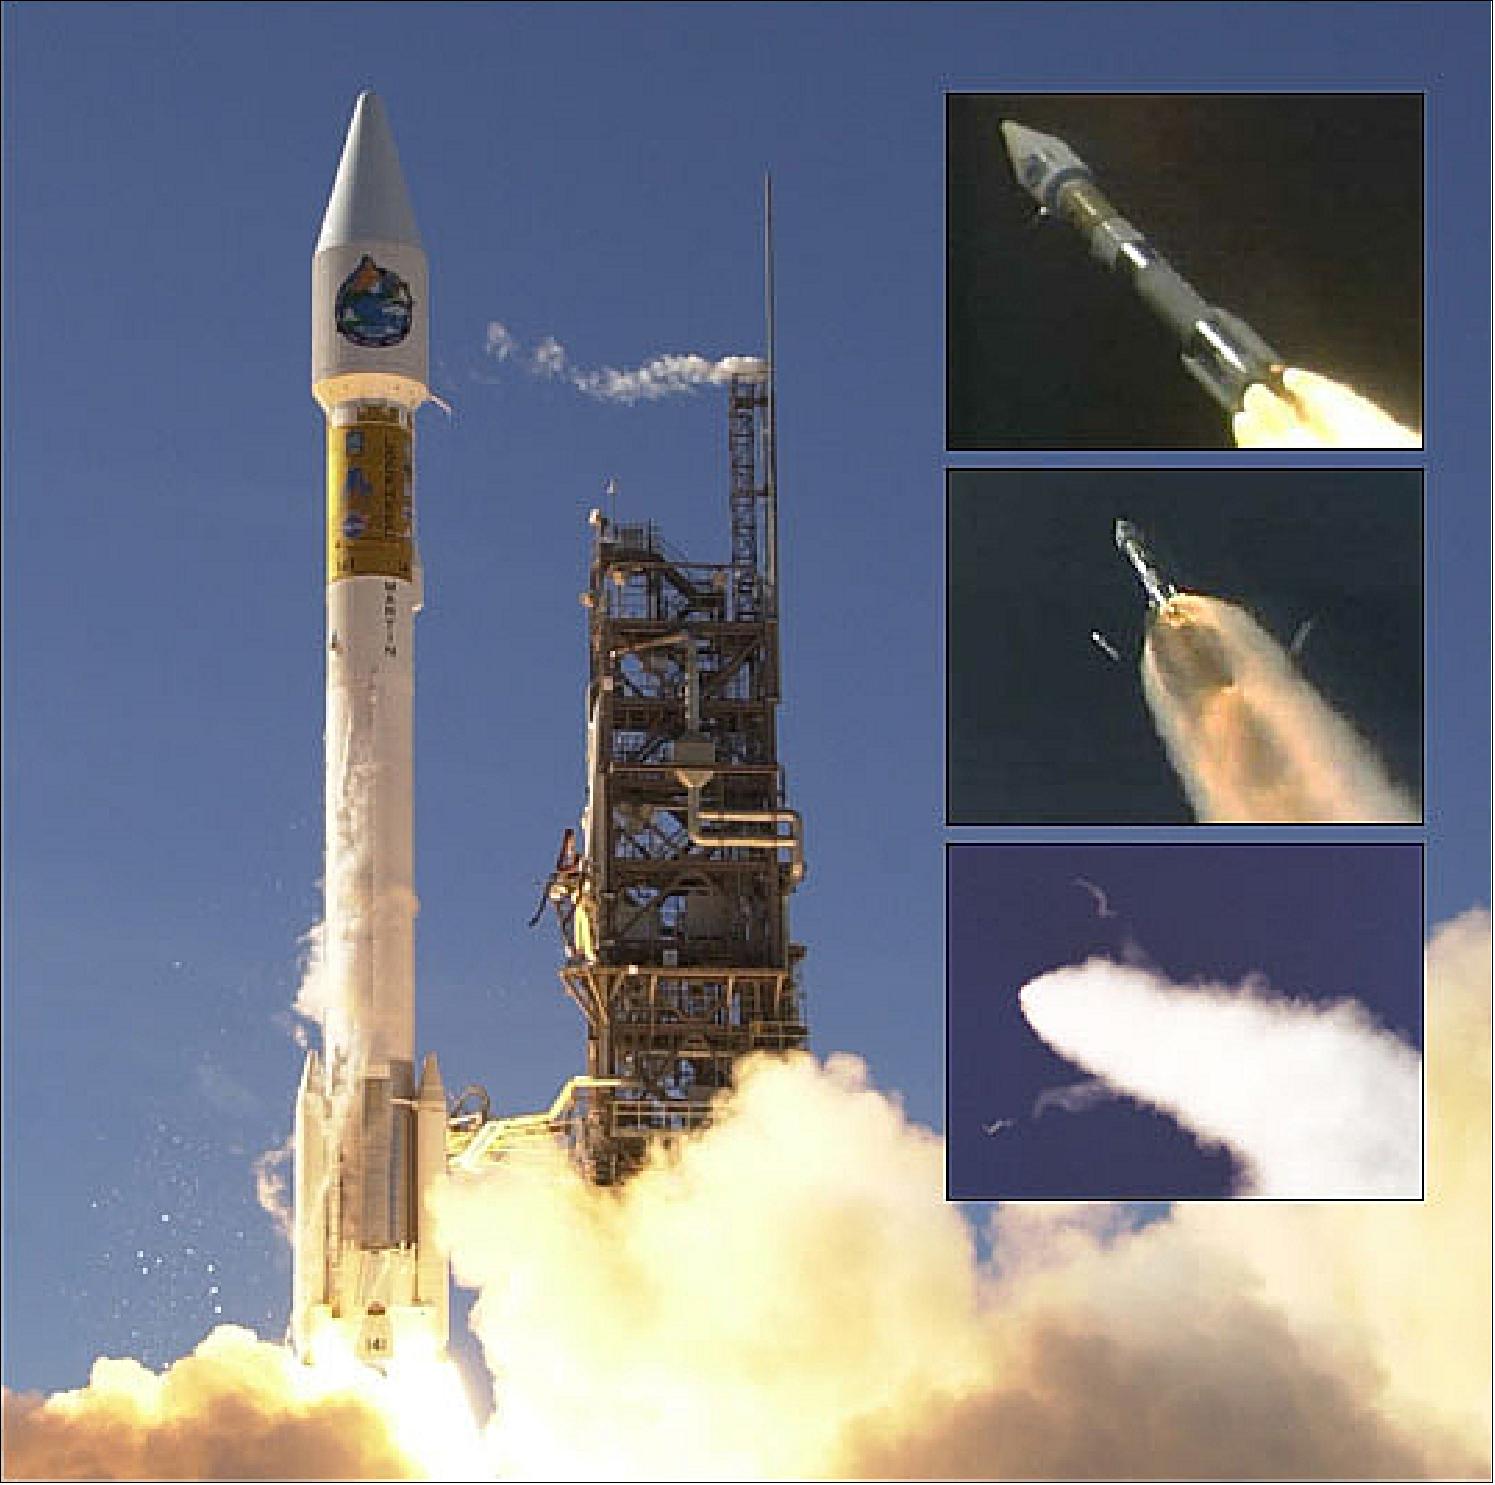 Figure 5: Photo of the Terra satellite launch on 18 Decmber 1999 (6:57 UTC) from VAFB, CA (image credit: NASA)